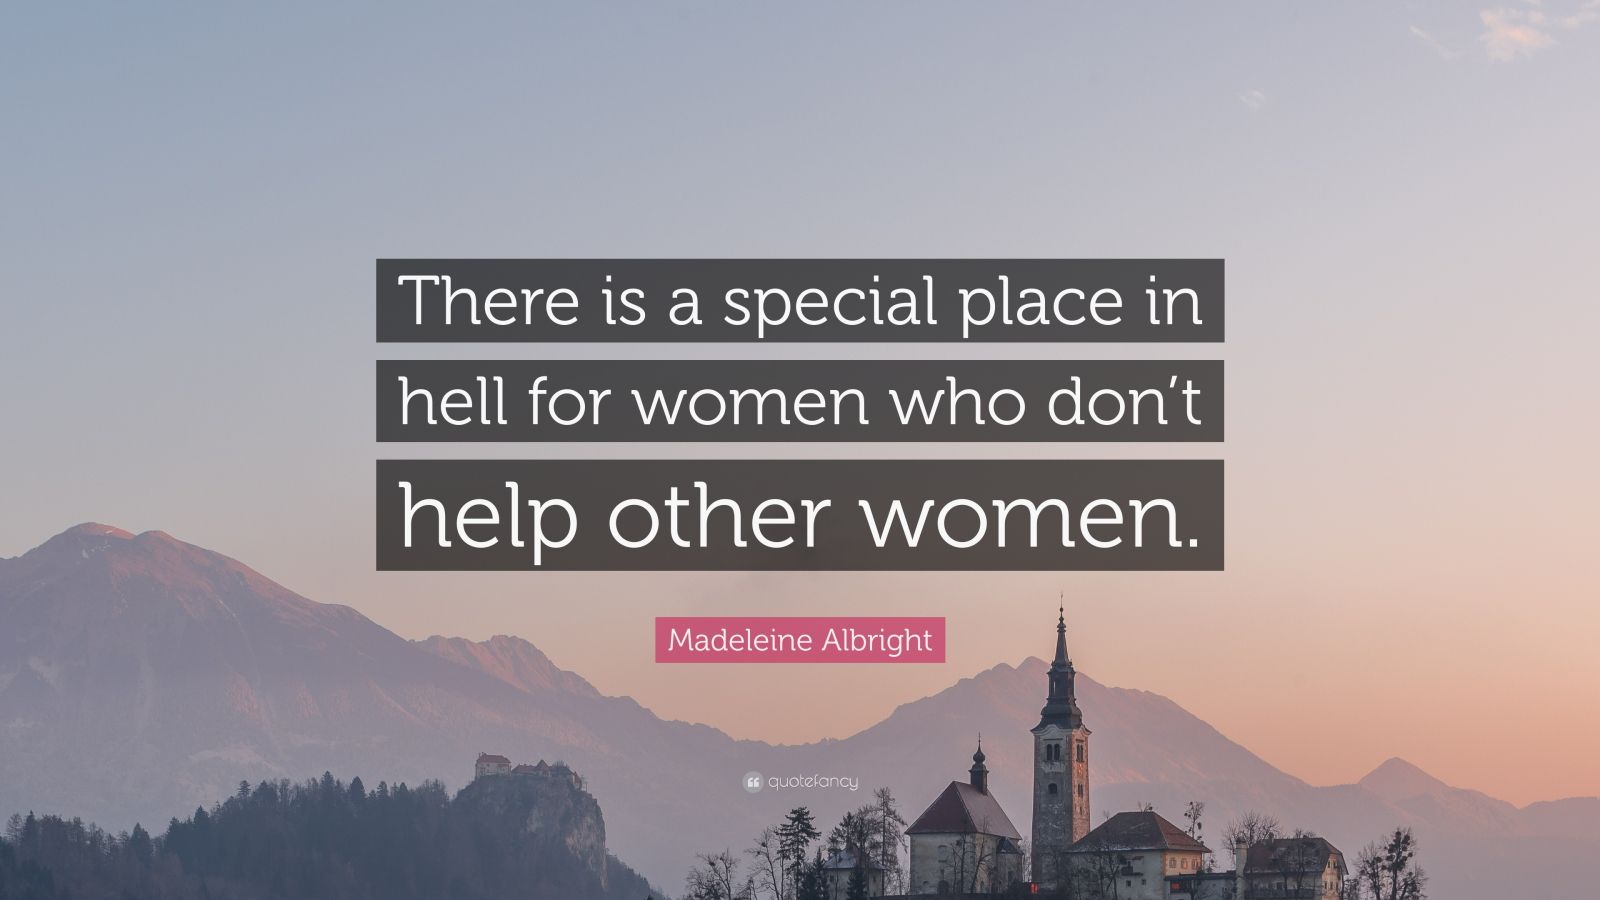 Madeleine Albright Quote: “There is a special place in hell for women